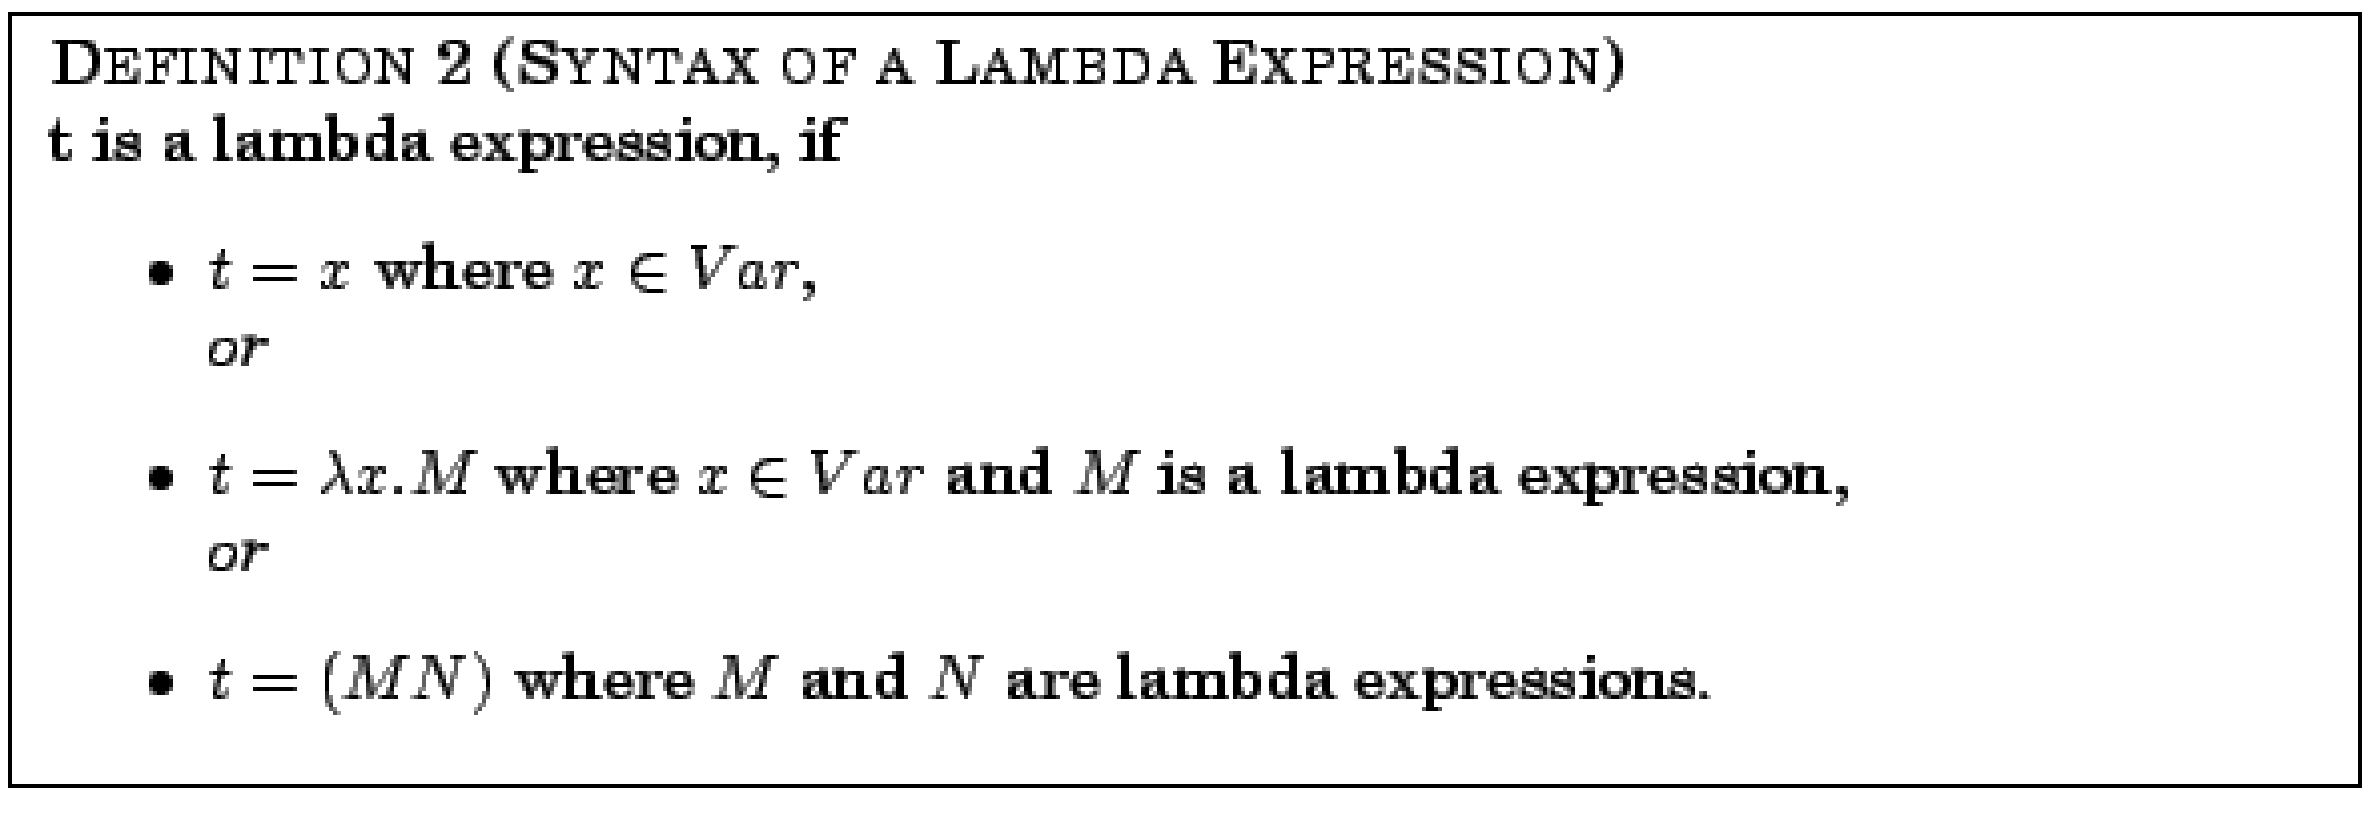 Syntax of a Lambda Expression